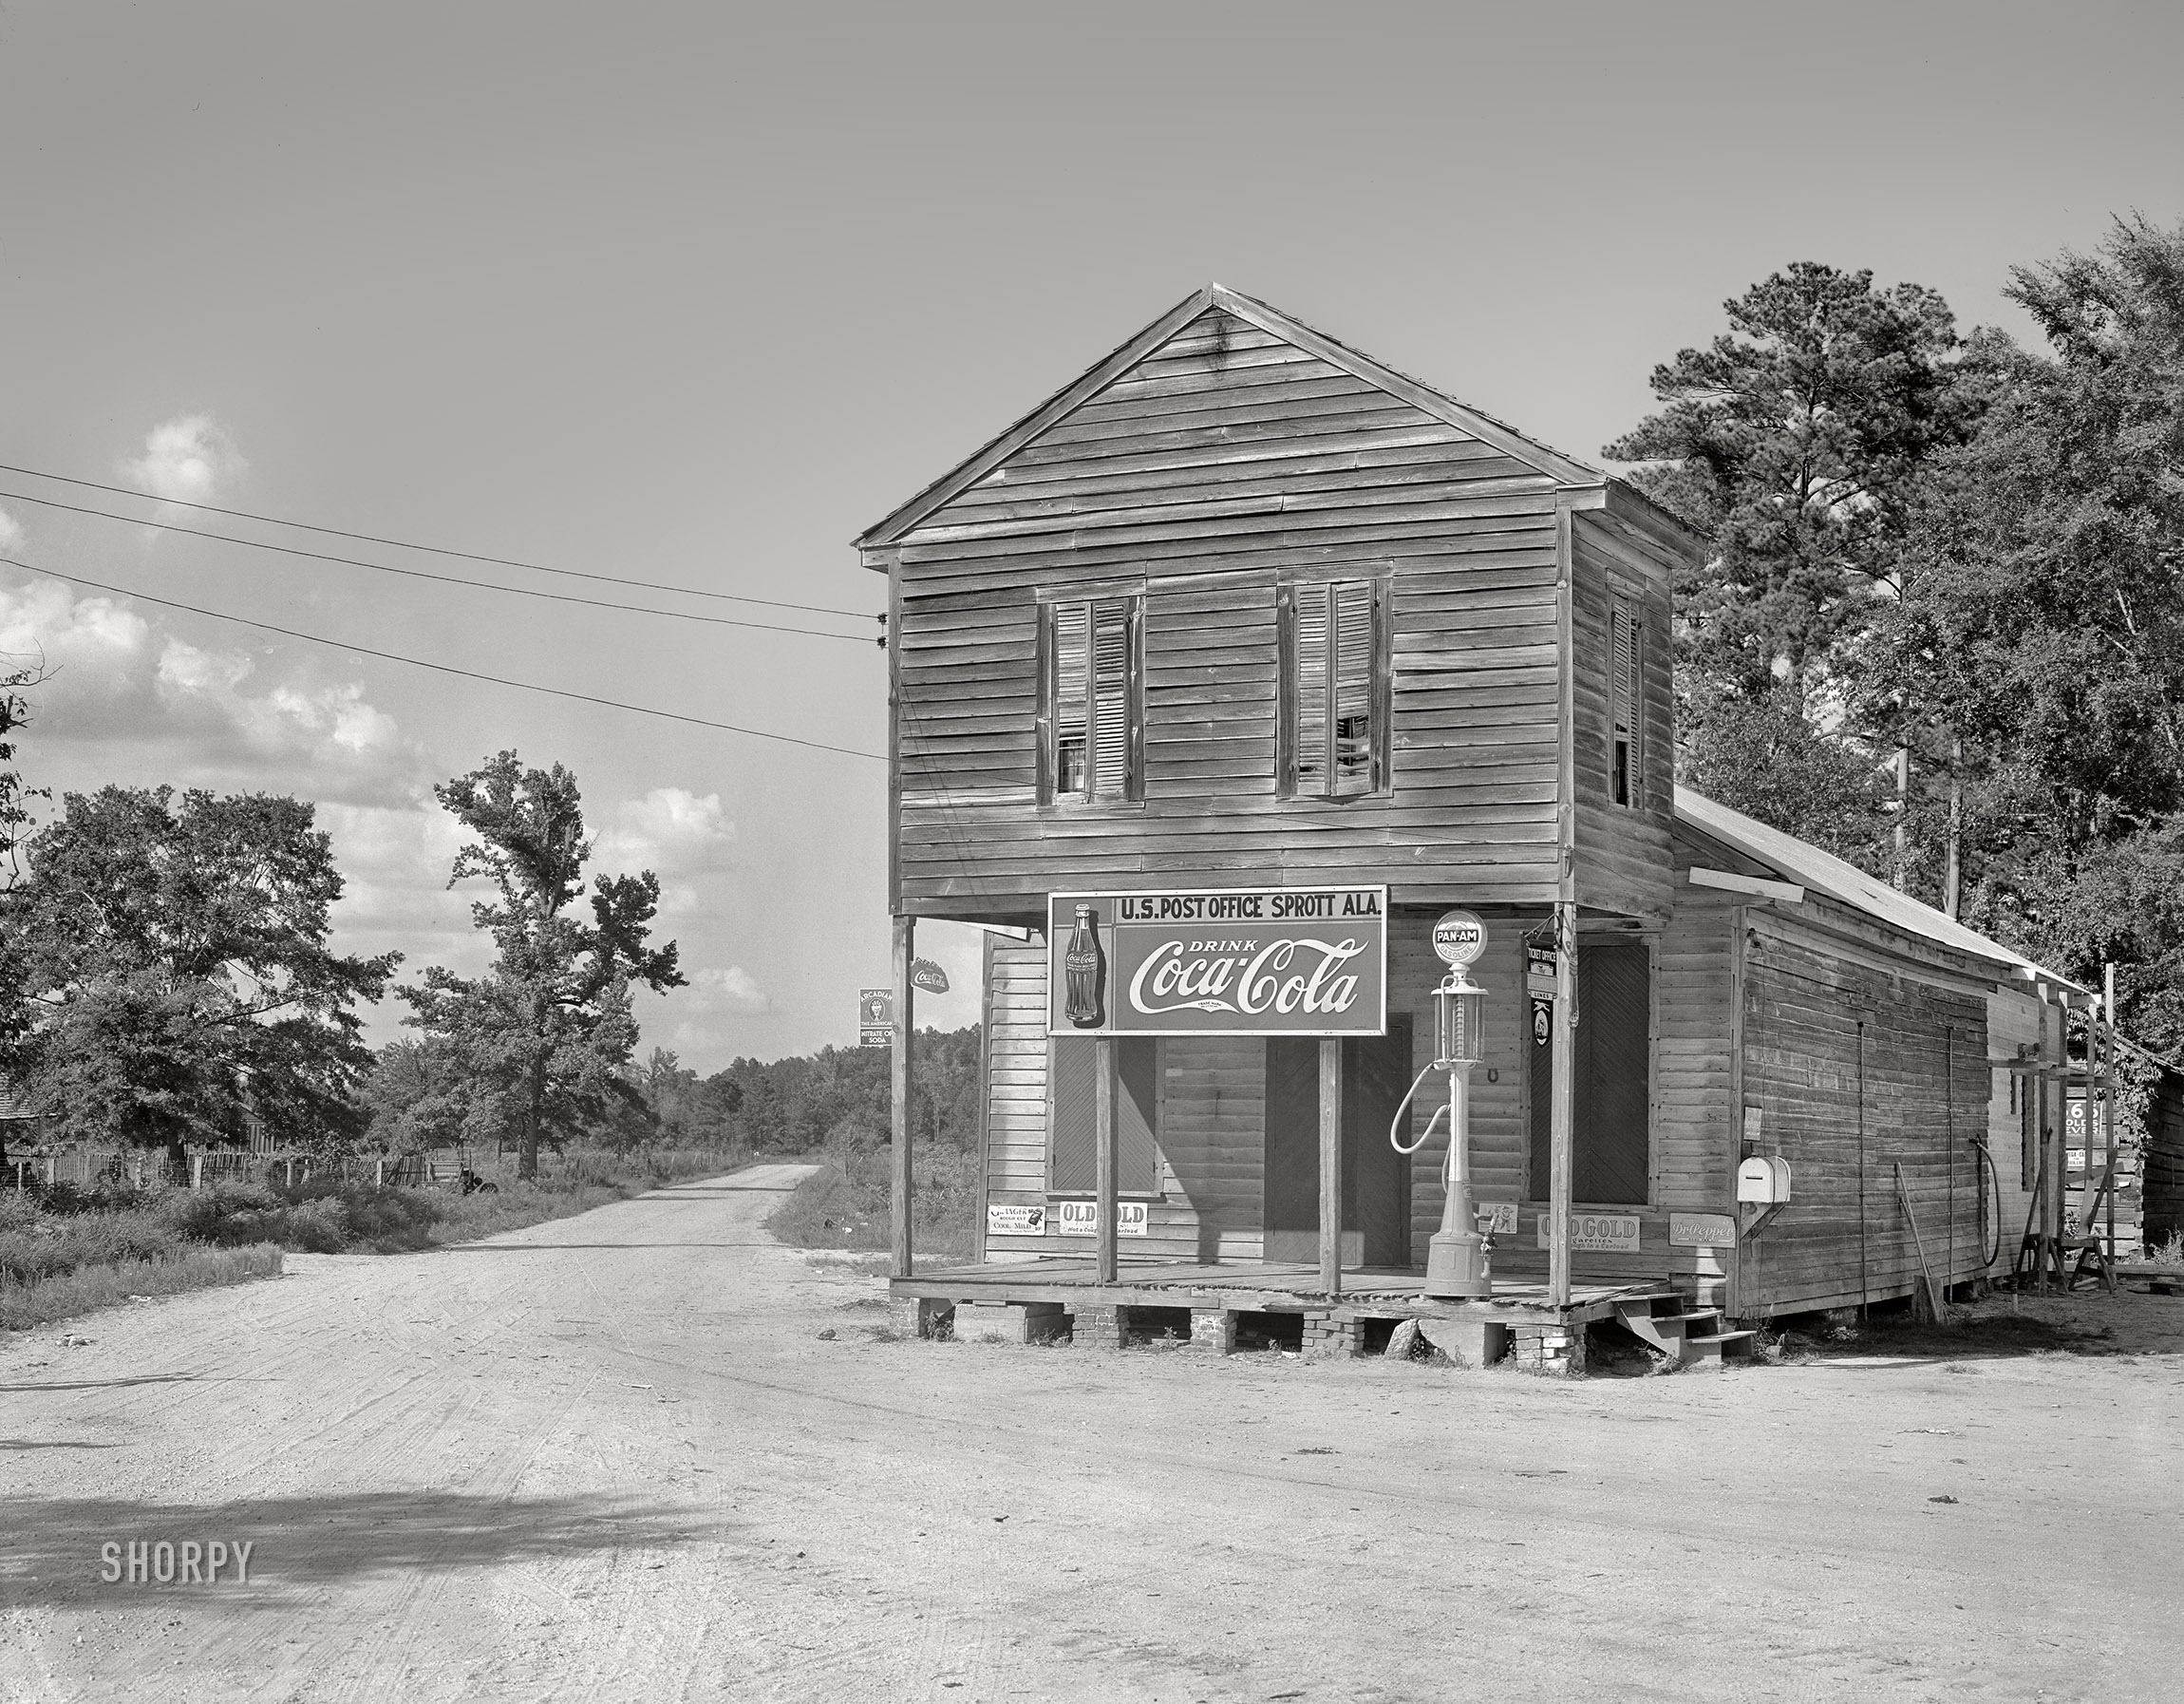 August 1936. "Crossroads store and post office. Sprott, Alabama." Last glimpsed here. 8x10 inch acetate negative by Walker Evans for the U.S. Resettlement Administration. View full size.